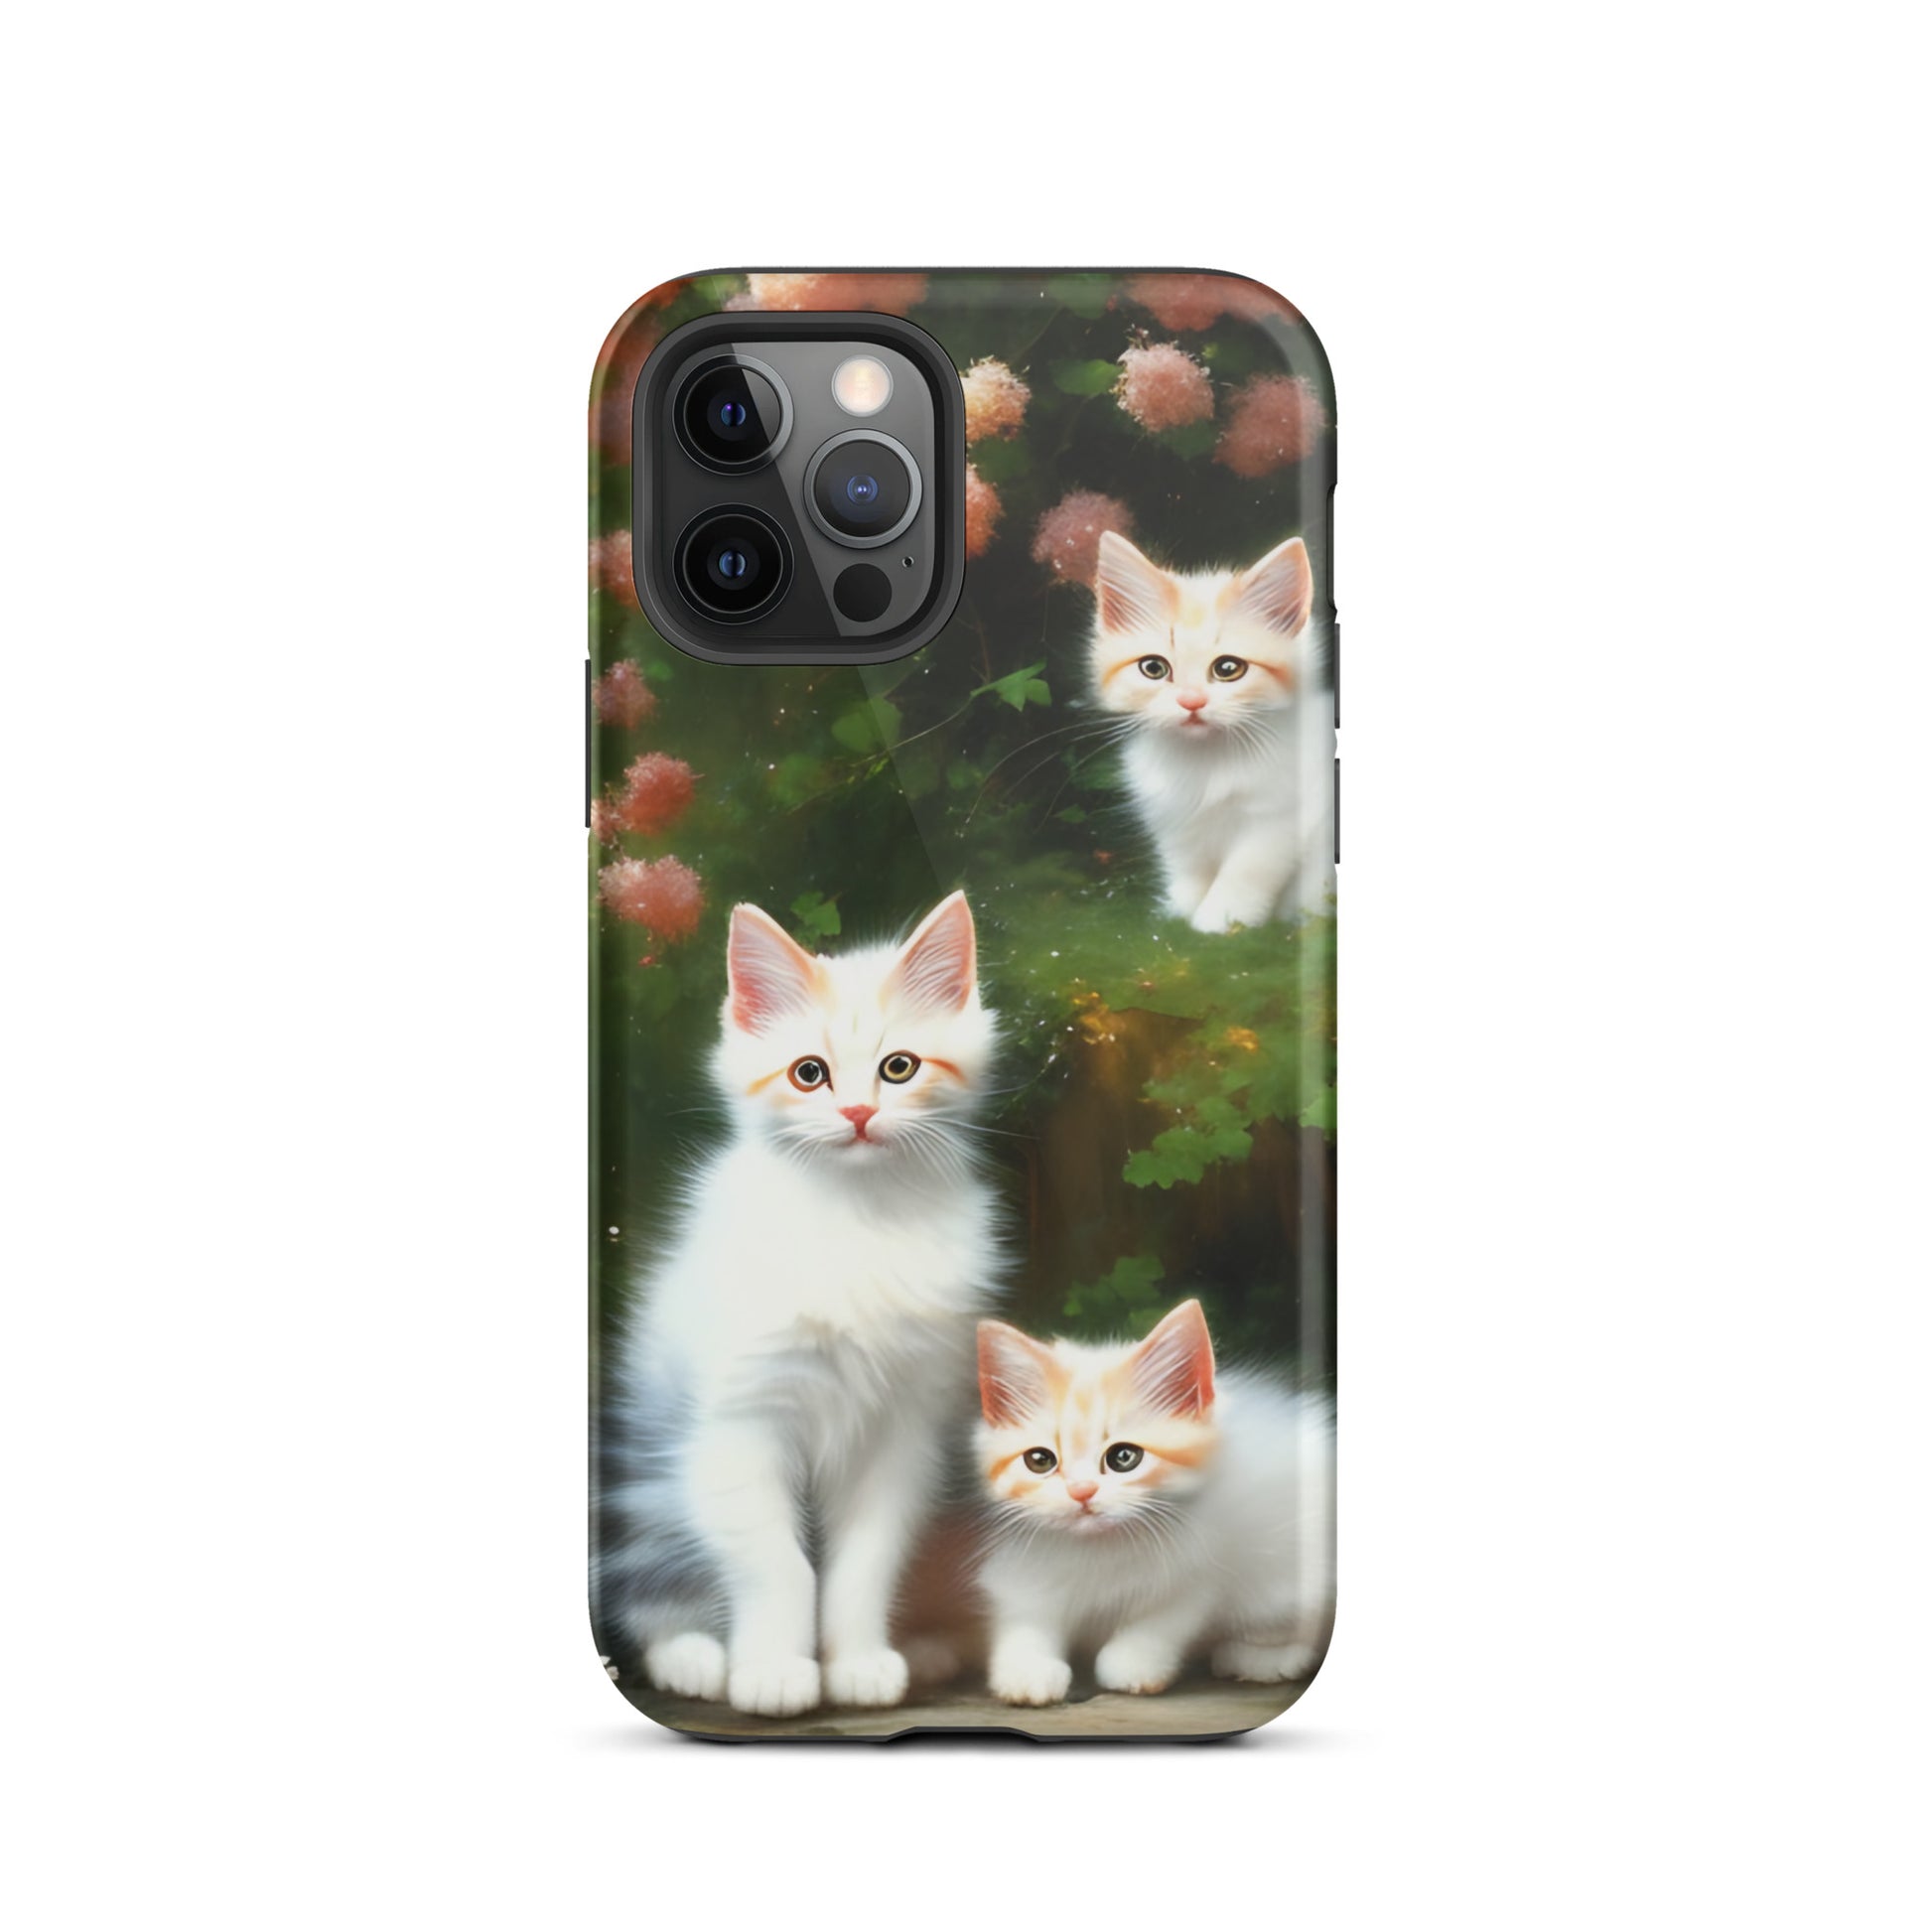 A picture of a iphone tough case with 3 fluffy white and orange kittens and peach colored flowers in the background - glossy-iphone-12-pro-front